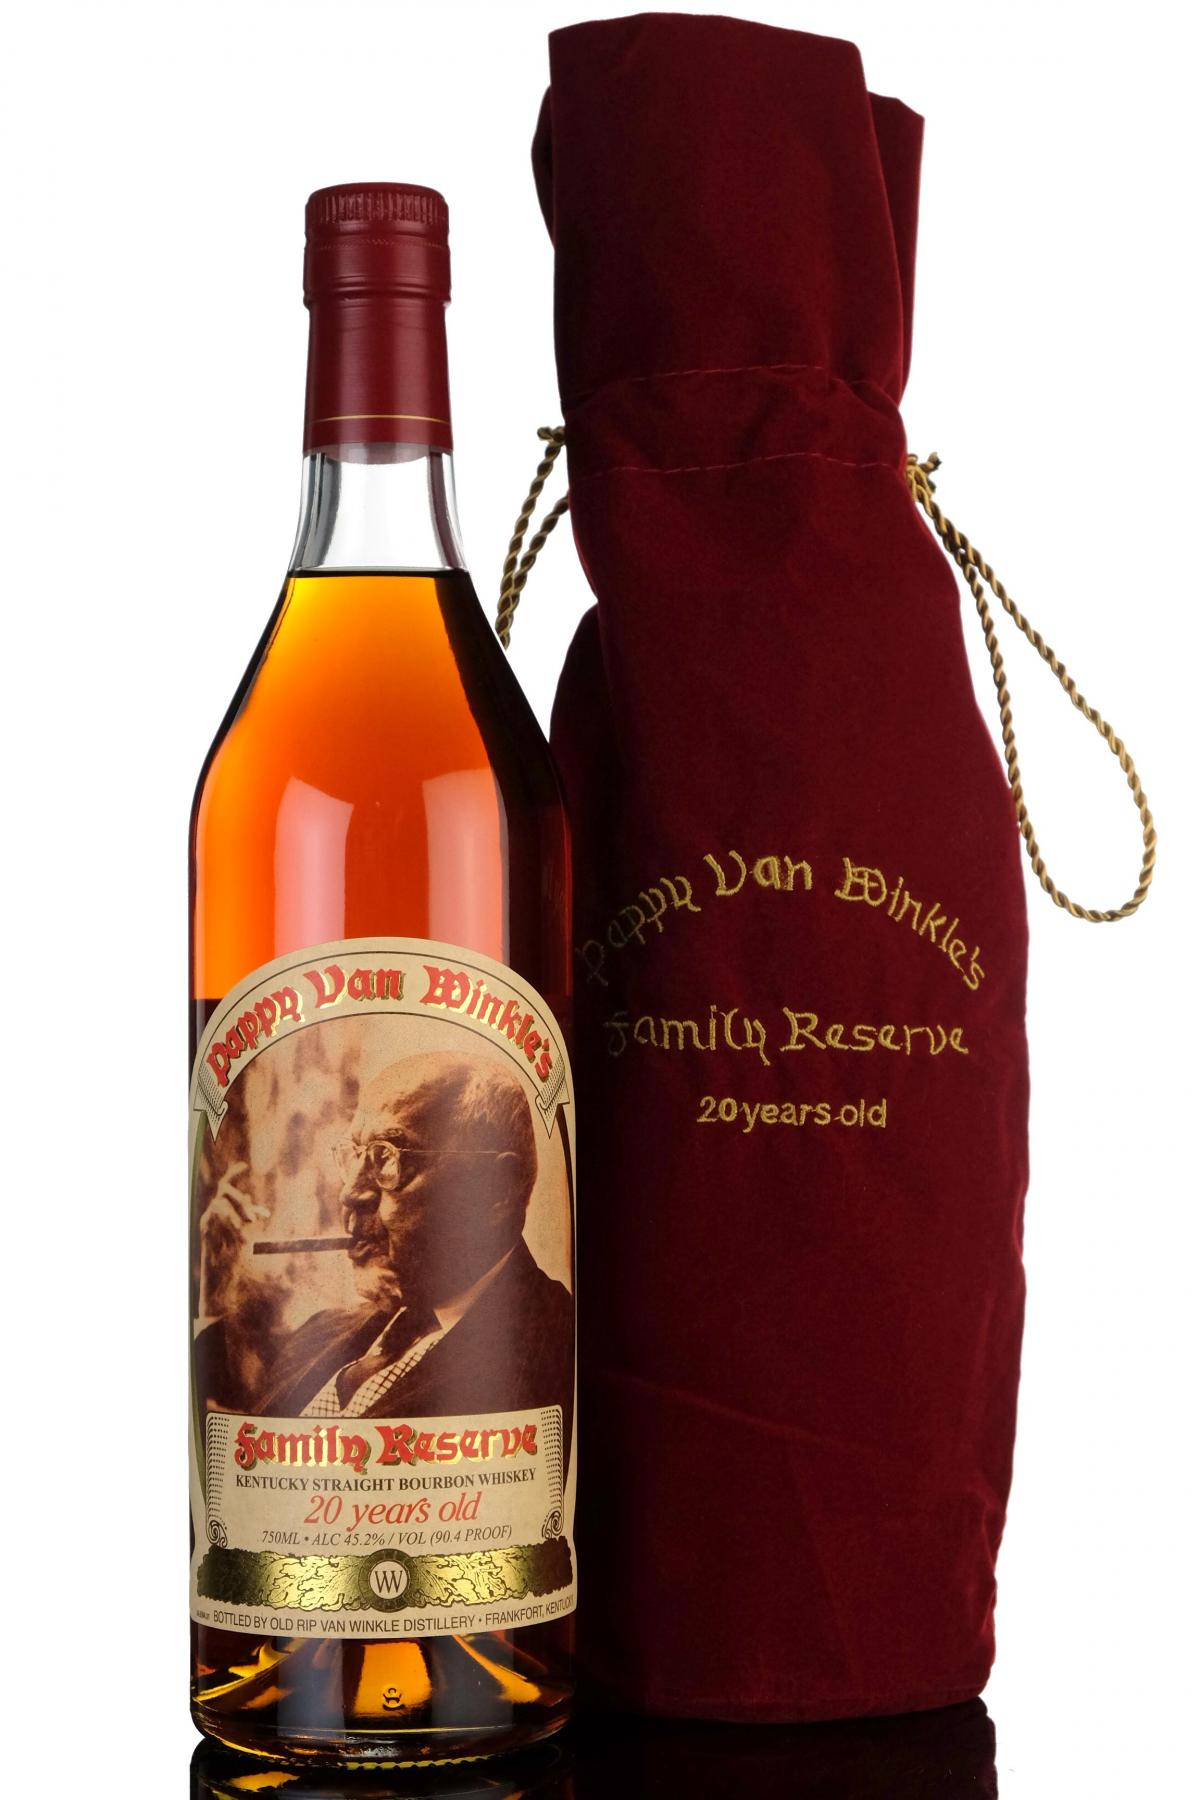 Pappy Van Winkles Family Reserve - 20 Year Old - Kentucky Straight Bourbon Whiskey